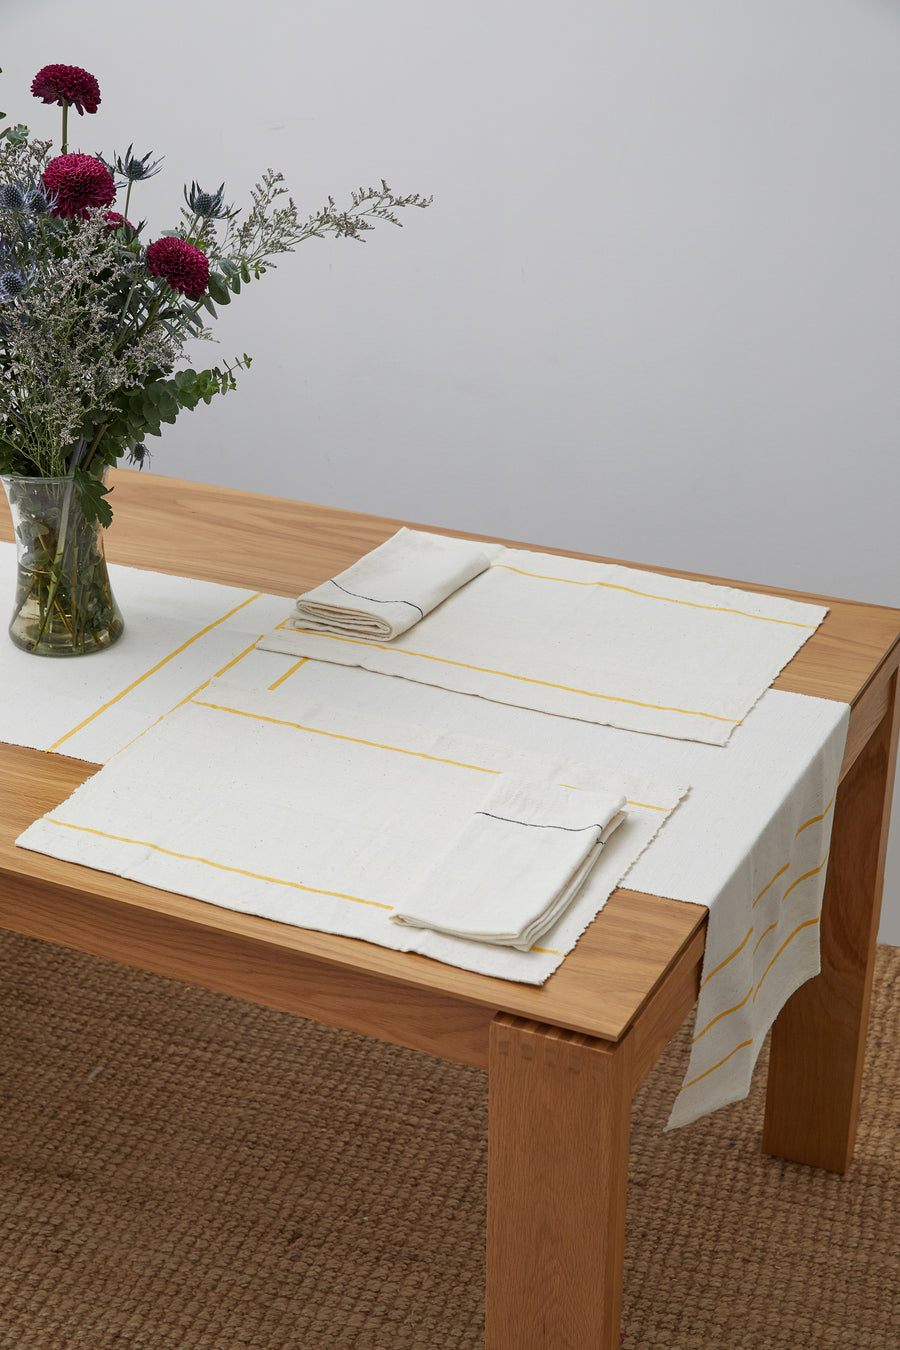 Sunflower Placemats